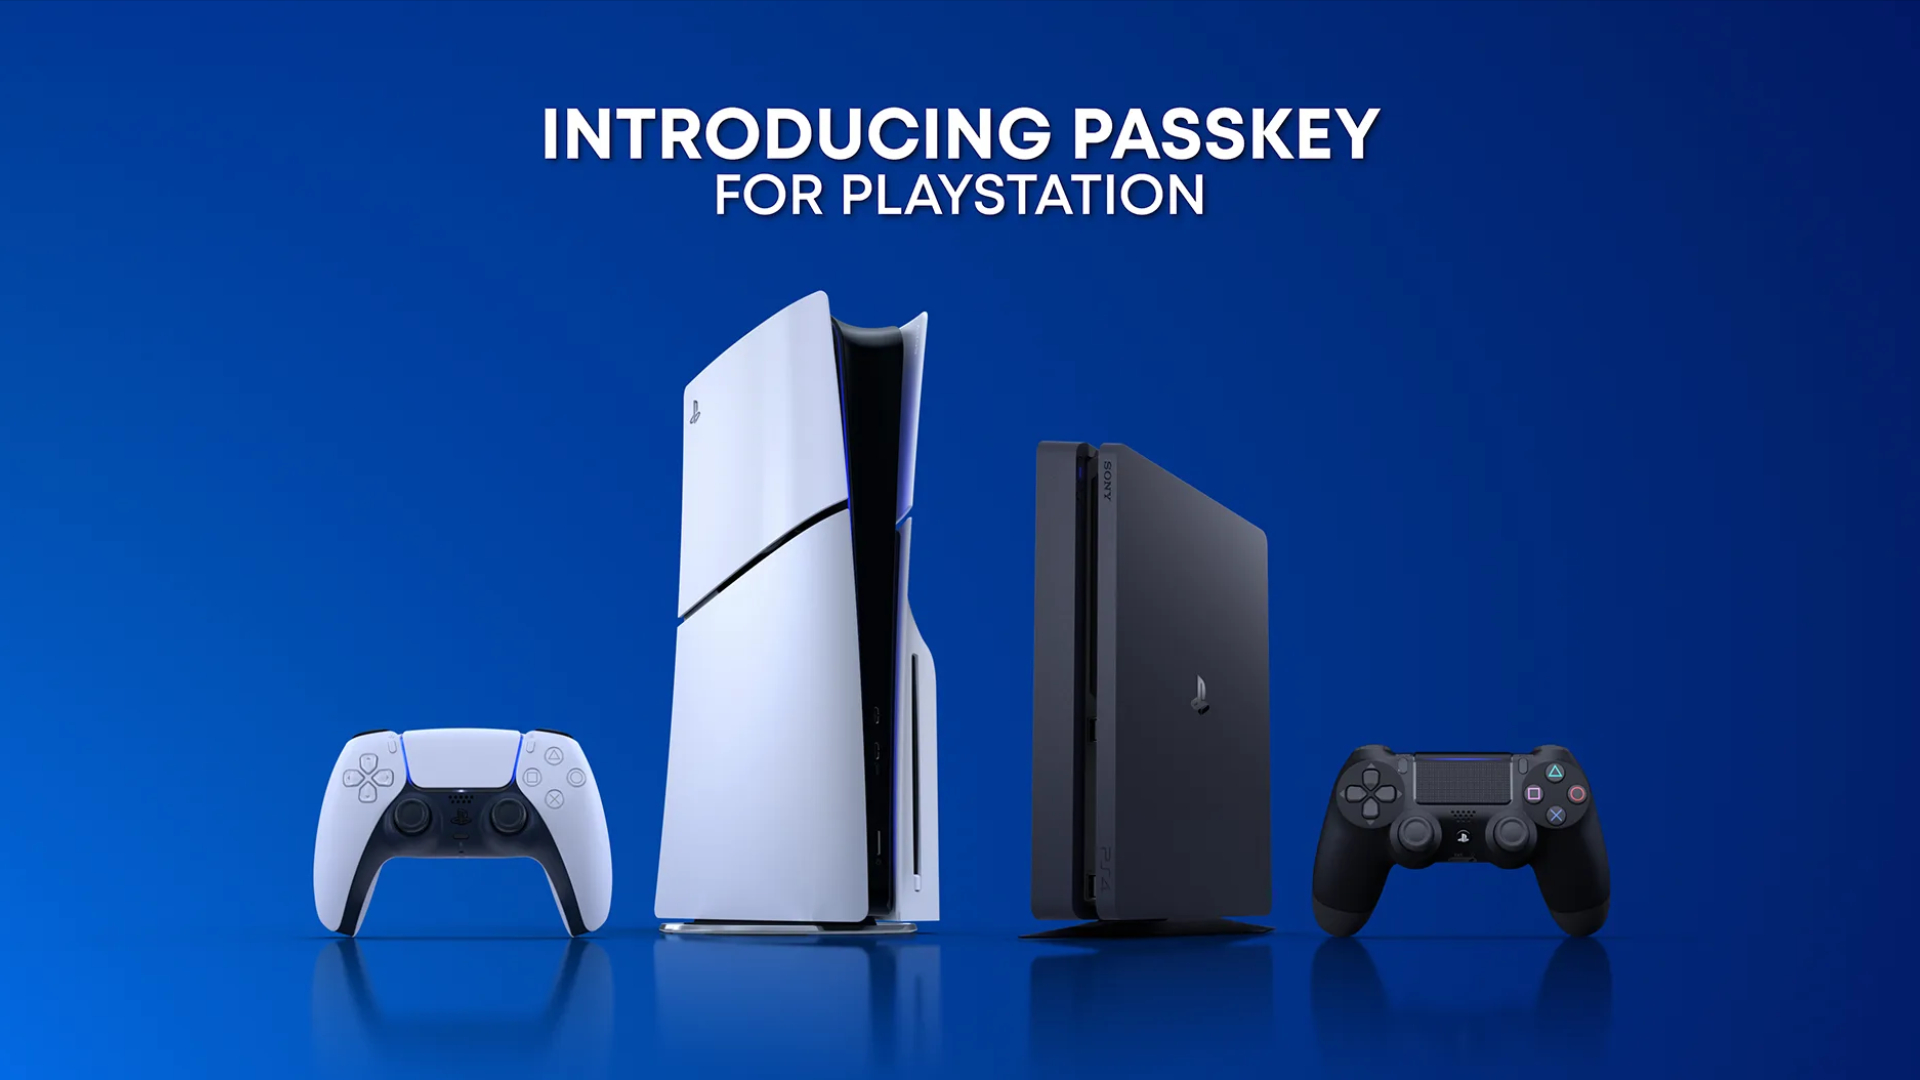 How to create a PlayStation passkey for secure passwordless authentication